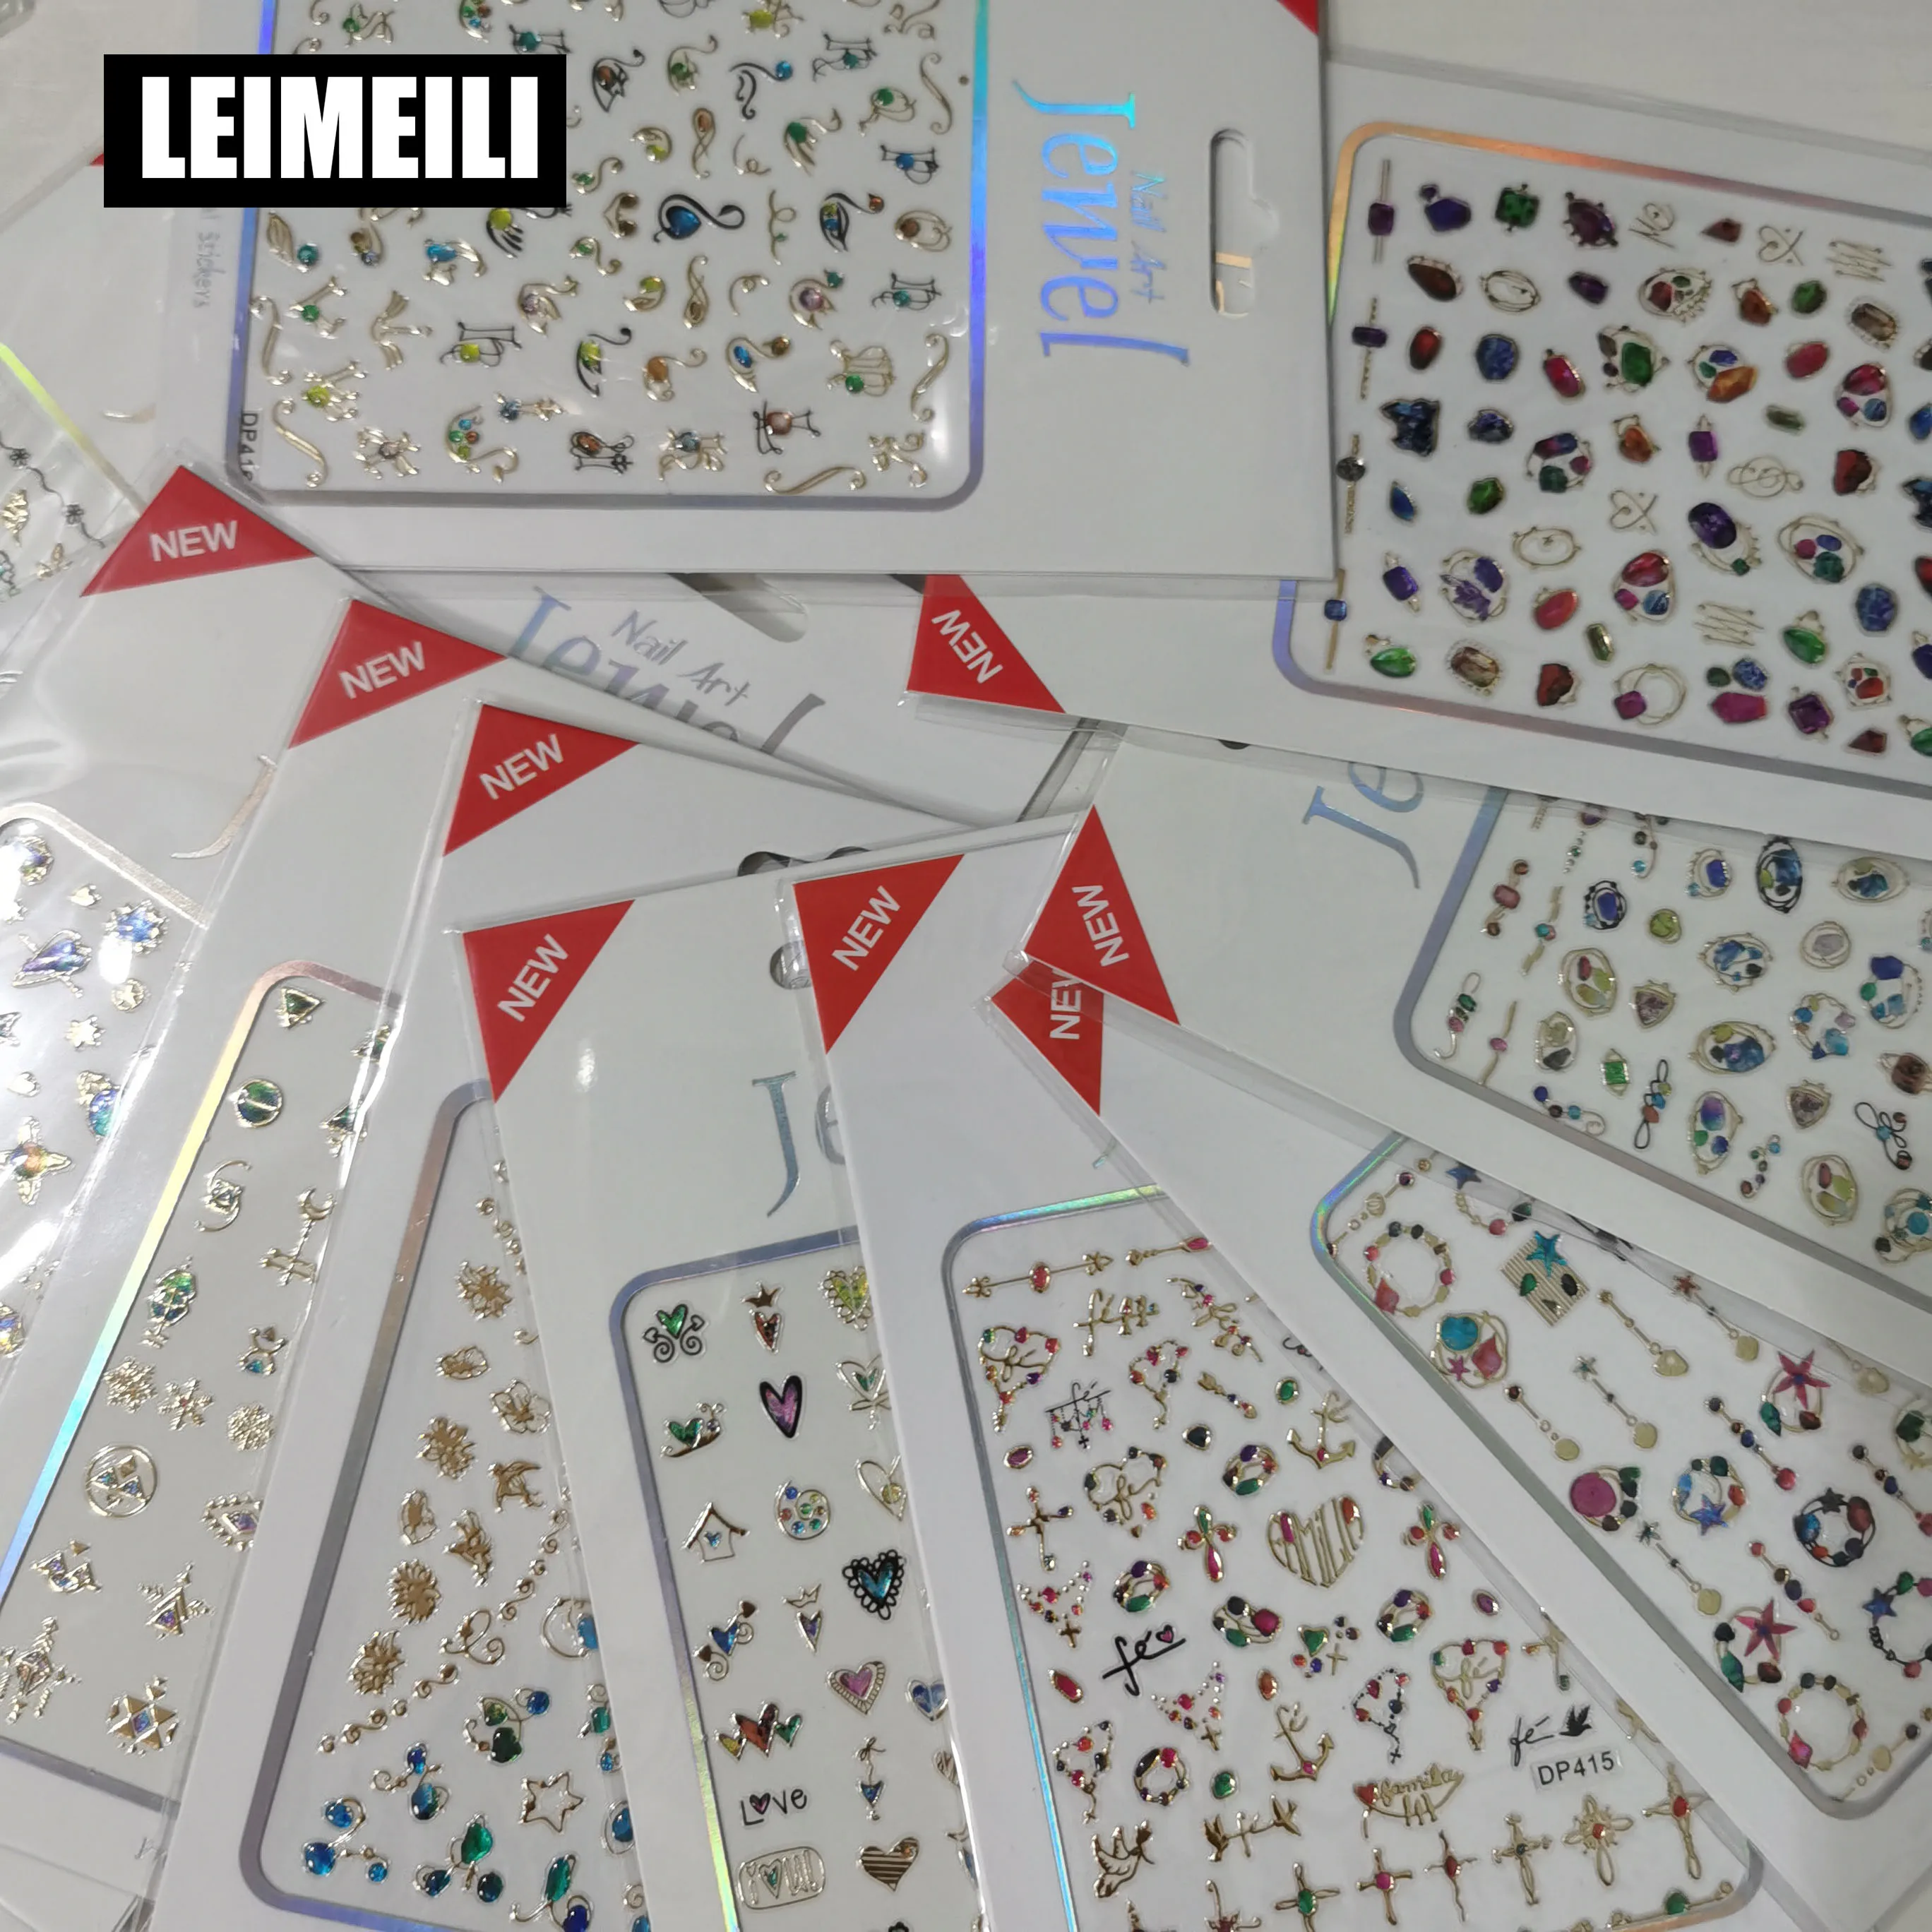 

12PCS 3D Goid colorful Decals Hot Stamping Nail Art Stickers Nail Art design Shinning Butterfiy Self Adhesive Nail Tattoos